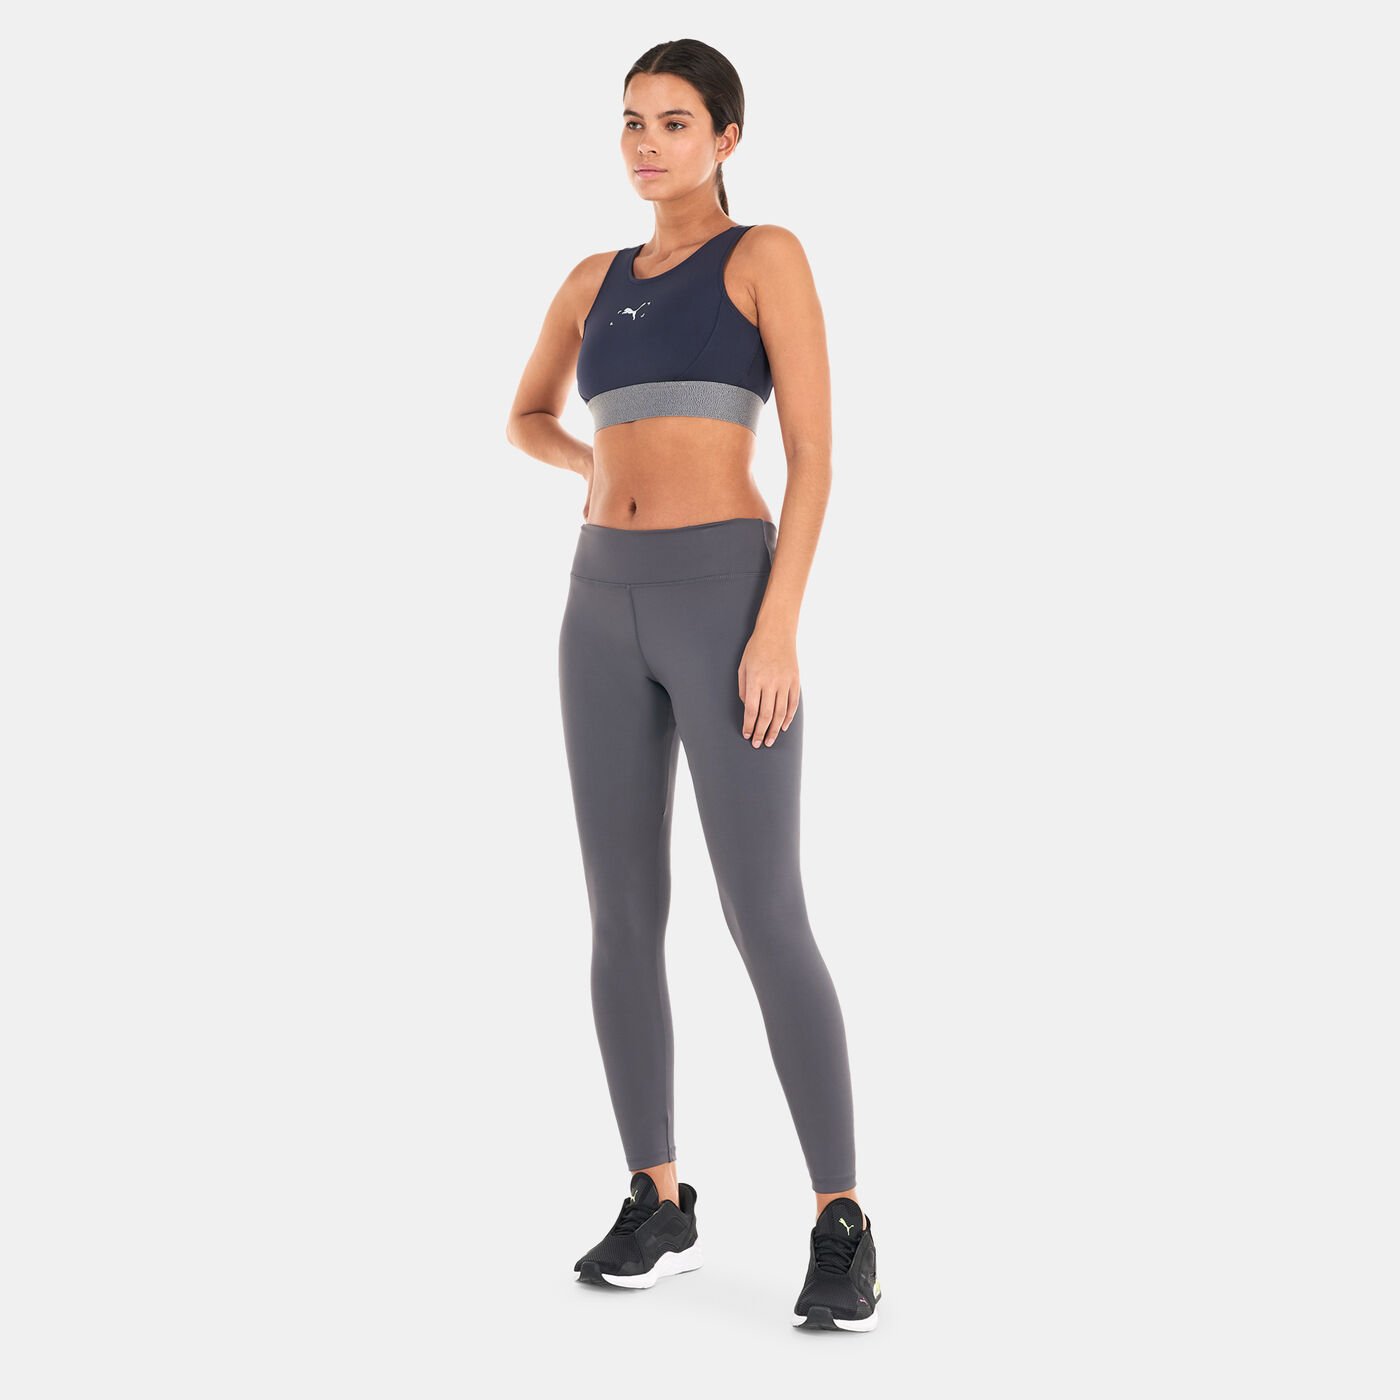 Women's RE:Collection Mid Impact Sports Bra